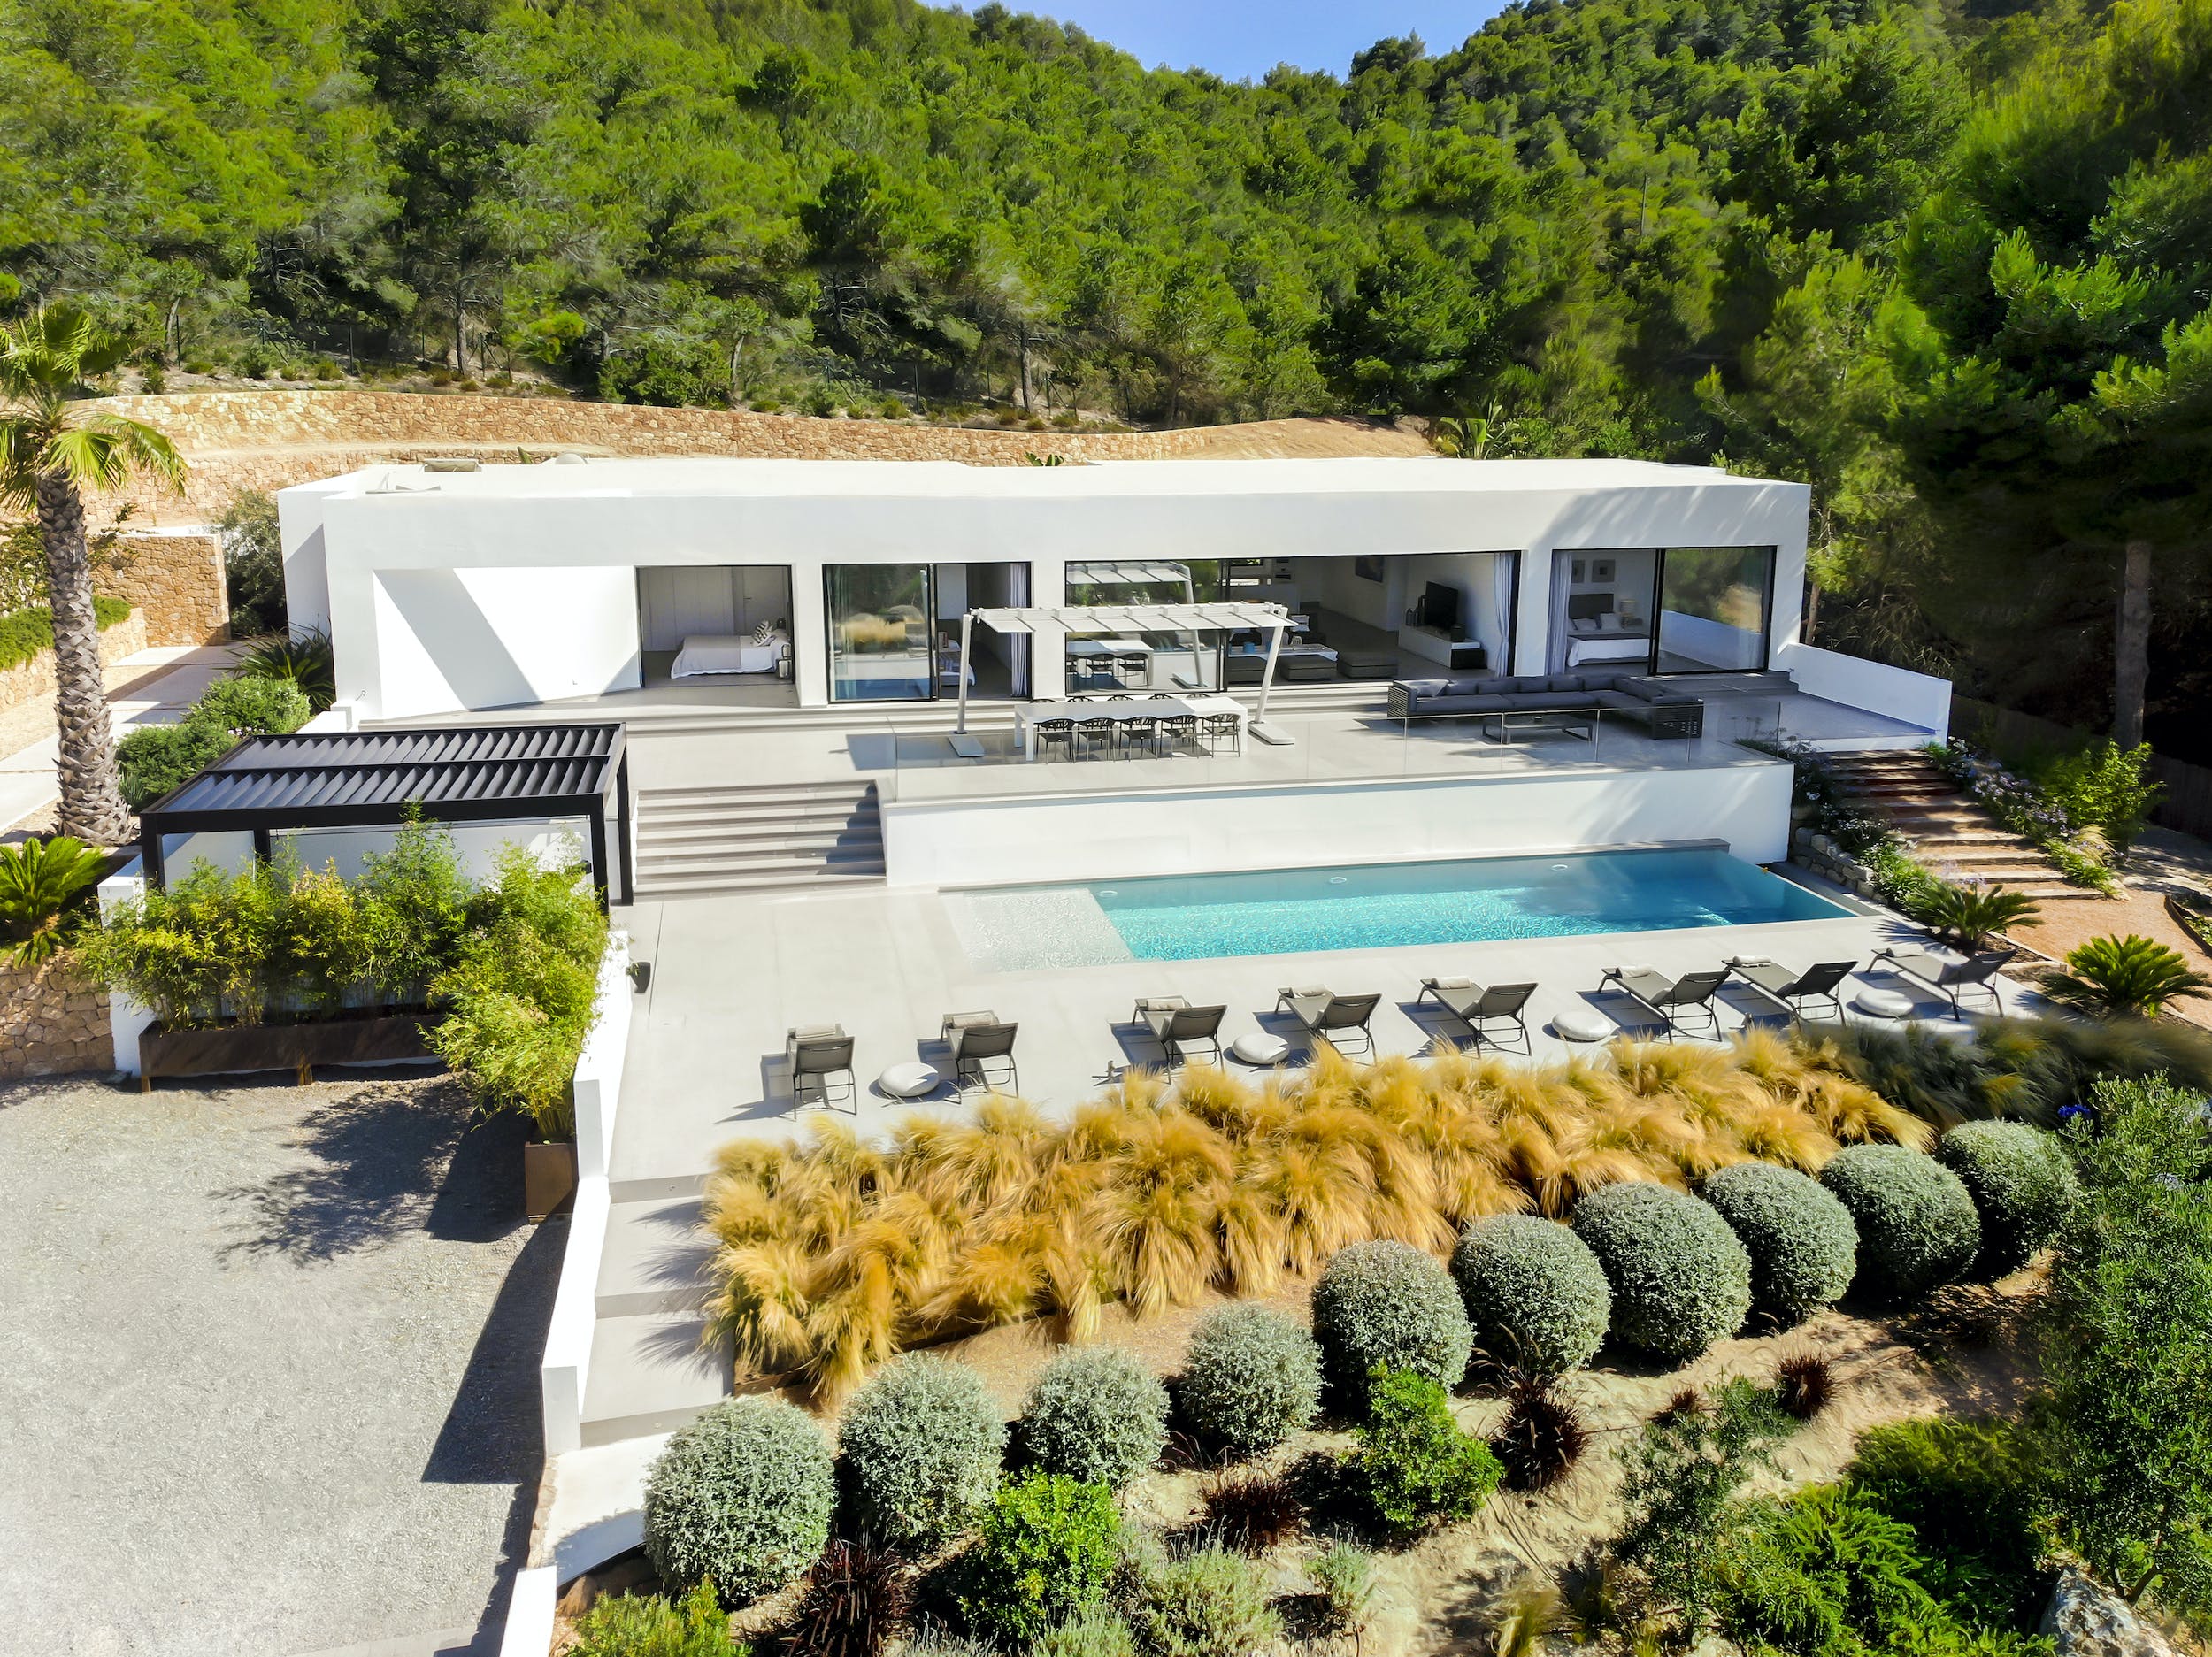 You are currently viewing Villa Ofelia “Sleek, modern property with breath-taking sea views.”